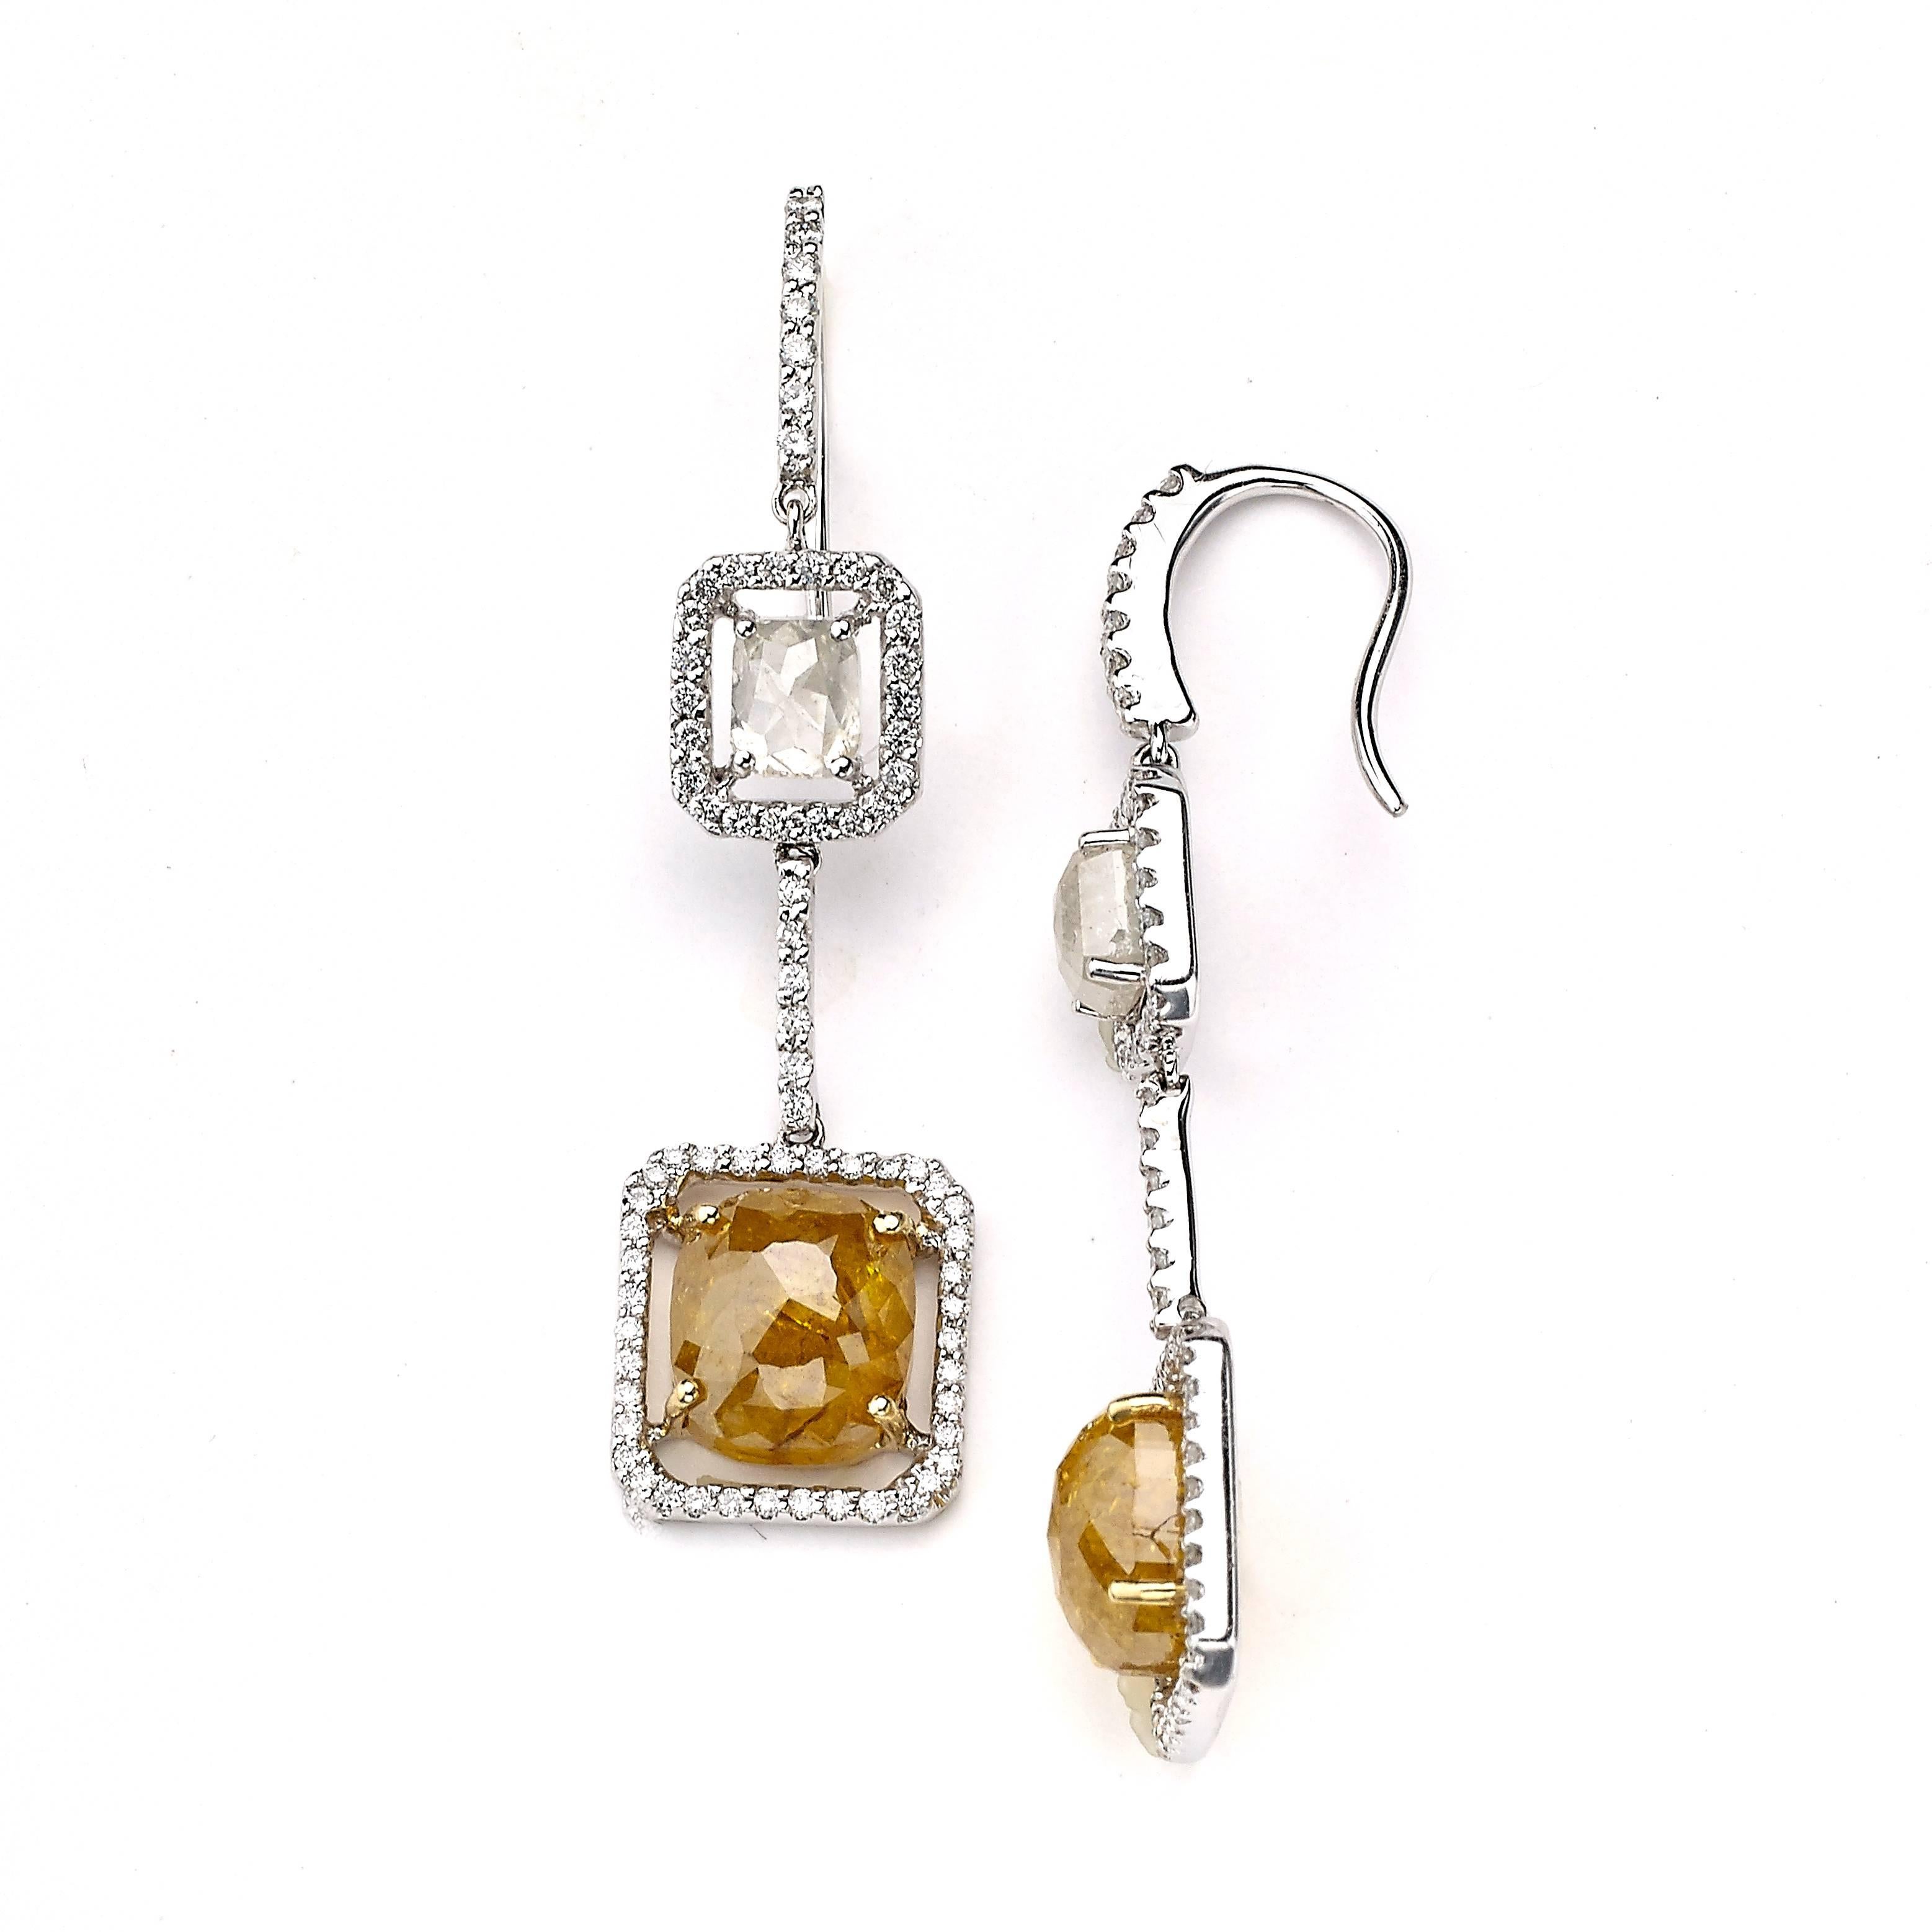 These Earrings feature Fancy Grey Diamonds and Yellow Diamonds surrounded by White Pave Diamonds.

Two Cushion Yellow Diamonds for a Total Weight of 8.00 Cts.
Clarity: I2-I3
Setting: Prong

Two Grey Diamonds: 1.7/8 cts
Clarity; I2-I3

White